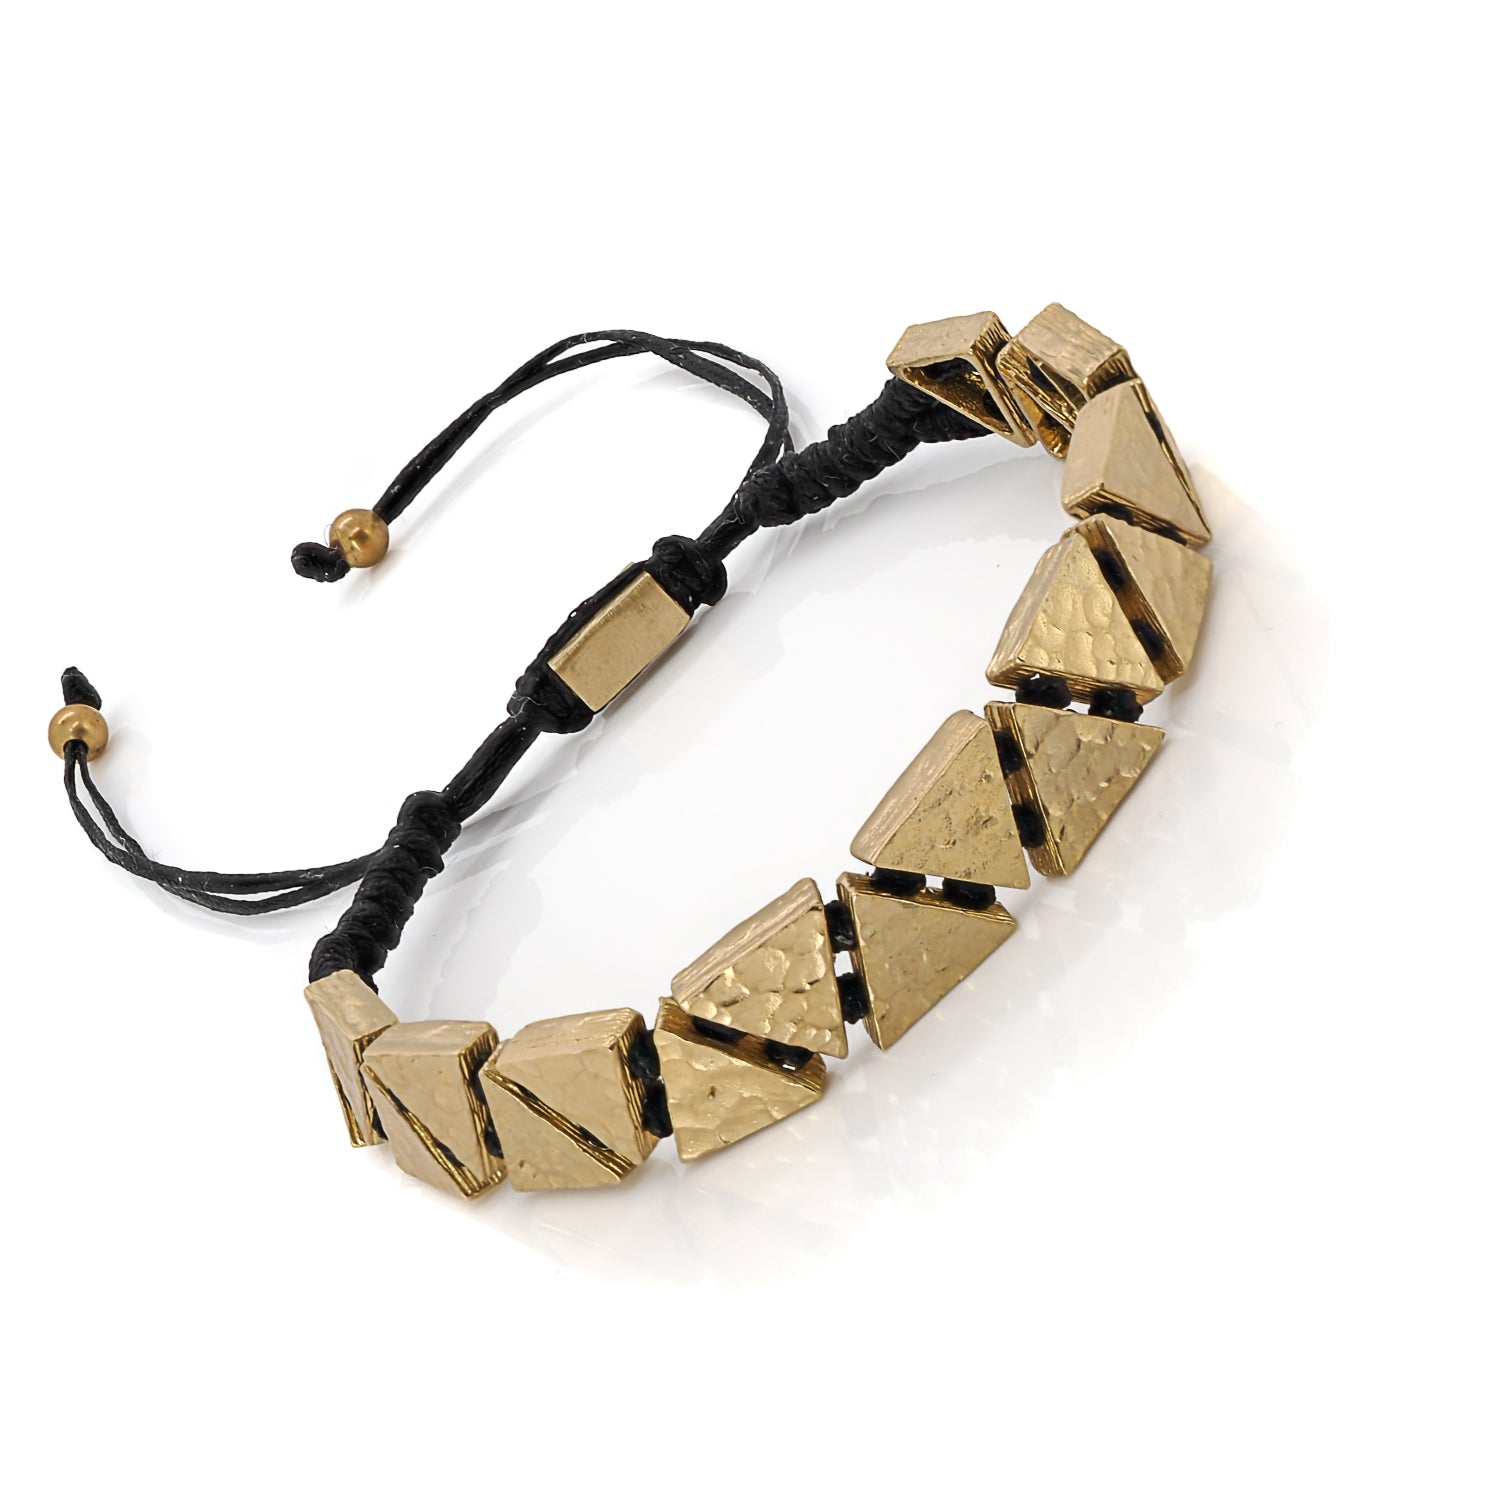 Woven Black and Gold Triangle Bracelet - A Symbol of Harmony and Balance